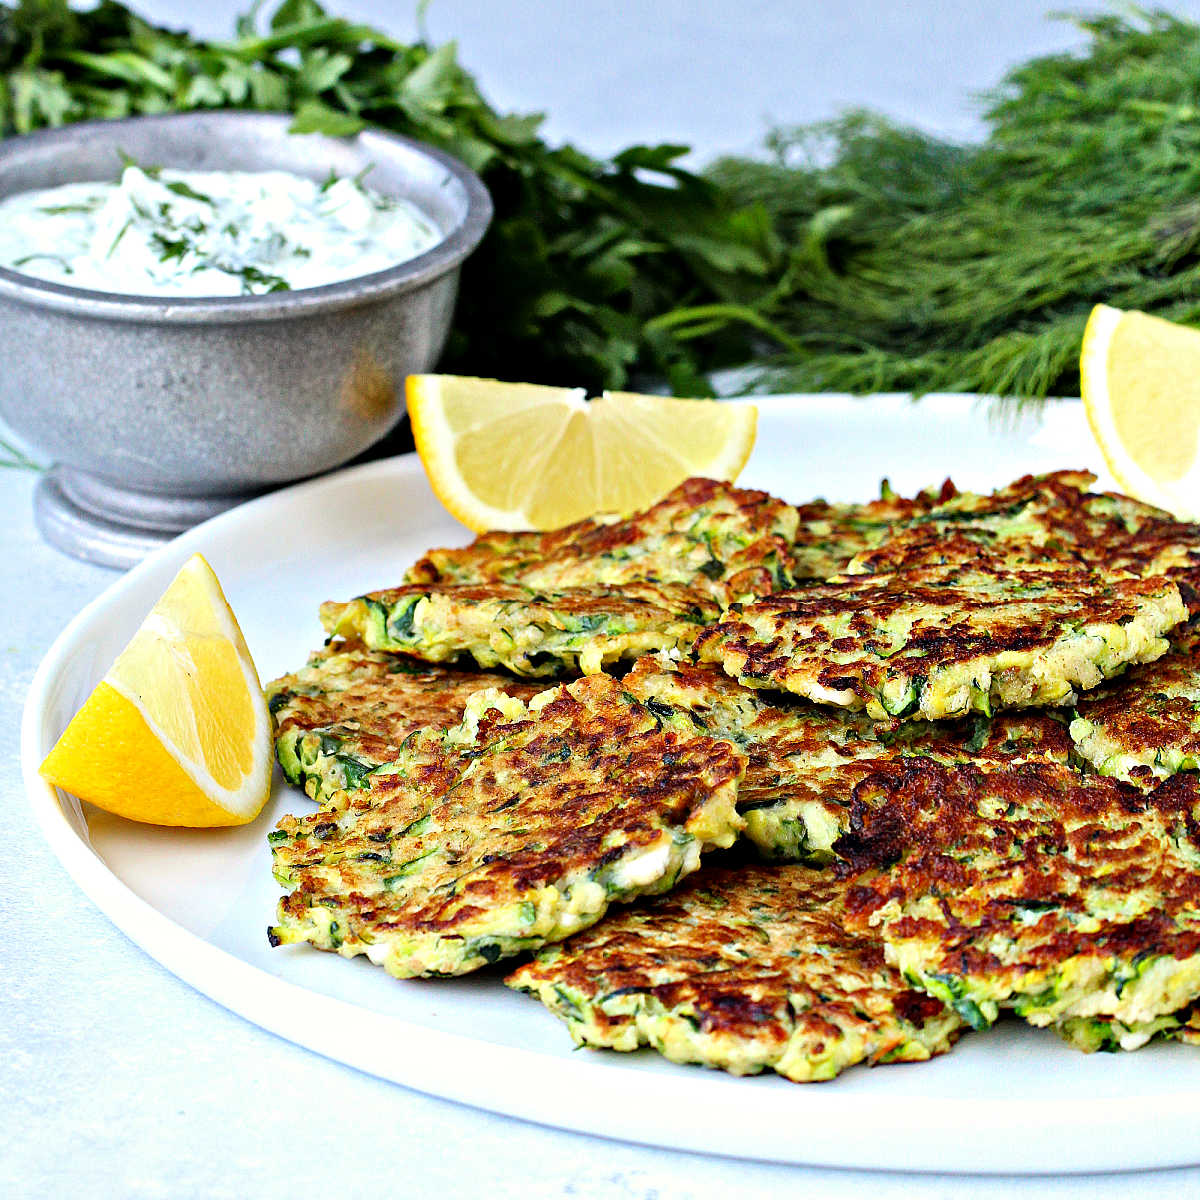 Greek zucchini fritters on a plate with lemon wedges. A bowl of tzatziki on the side.